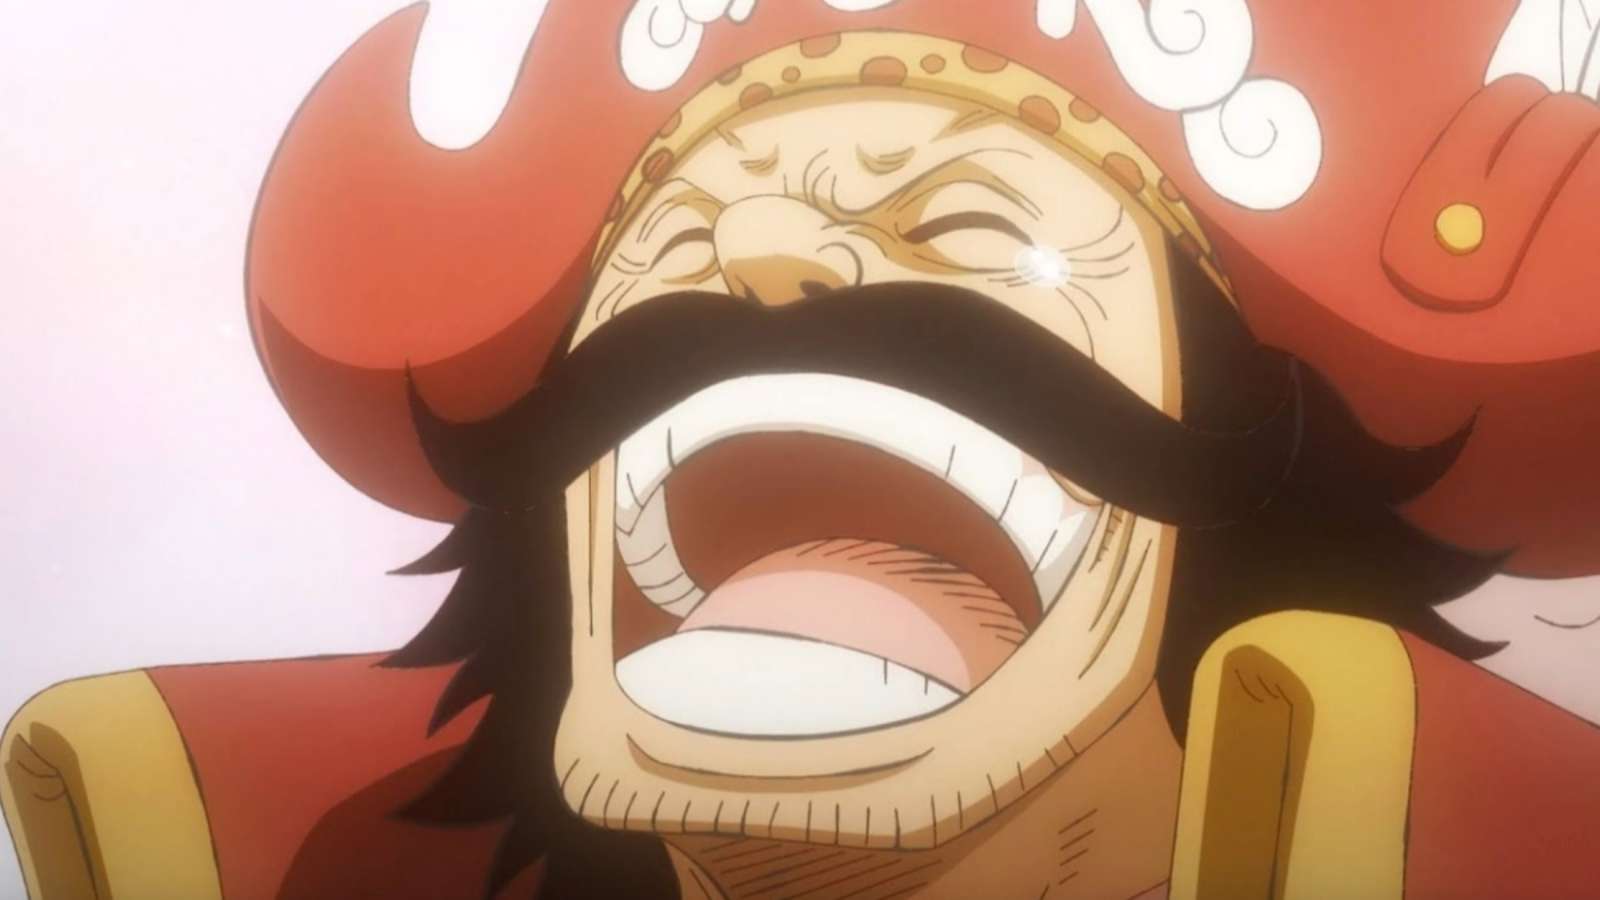 The One Piece Anime Made Some Changes Due to Fan Backlash - Here's Why